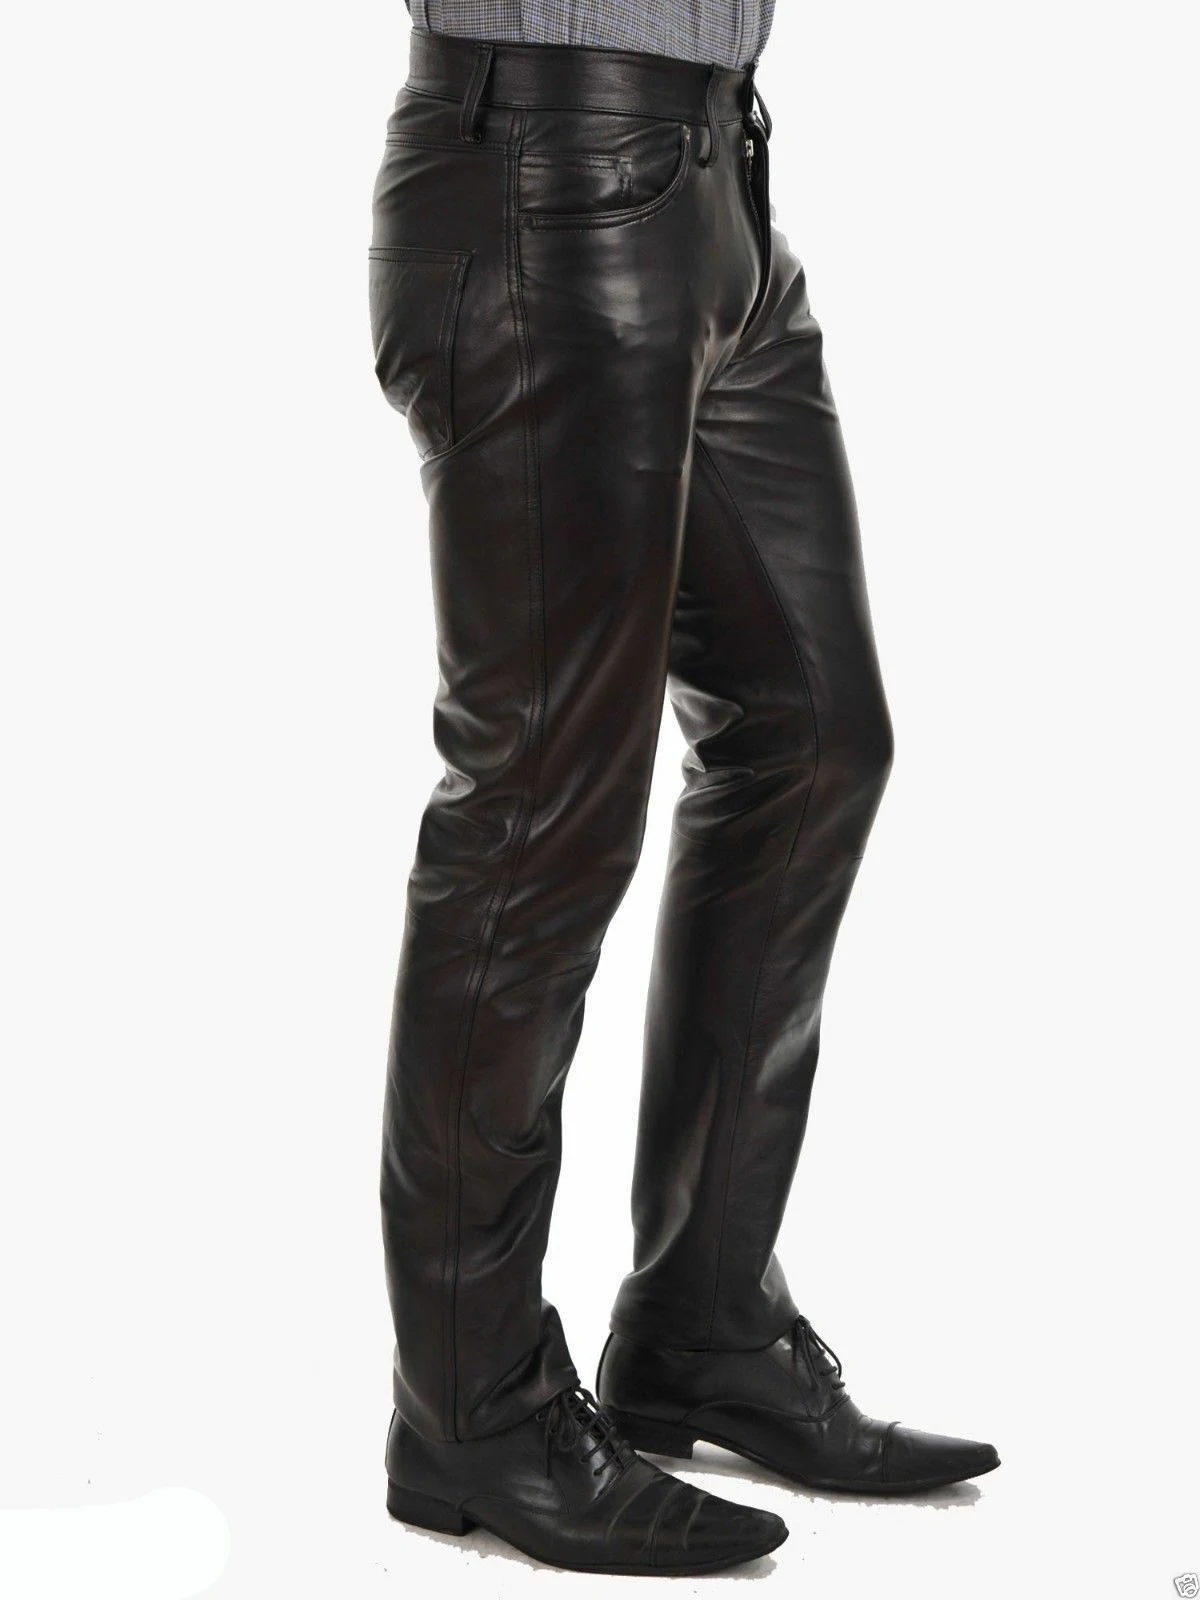 Men Leather Pants Skinny Fit Elasti Fashion PU Leather Trousers Motorcycle Pants Wet Look Stretch Faux Leather Streetwear